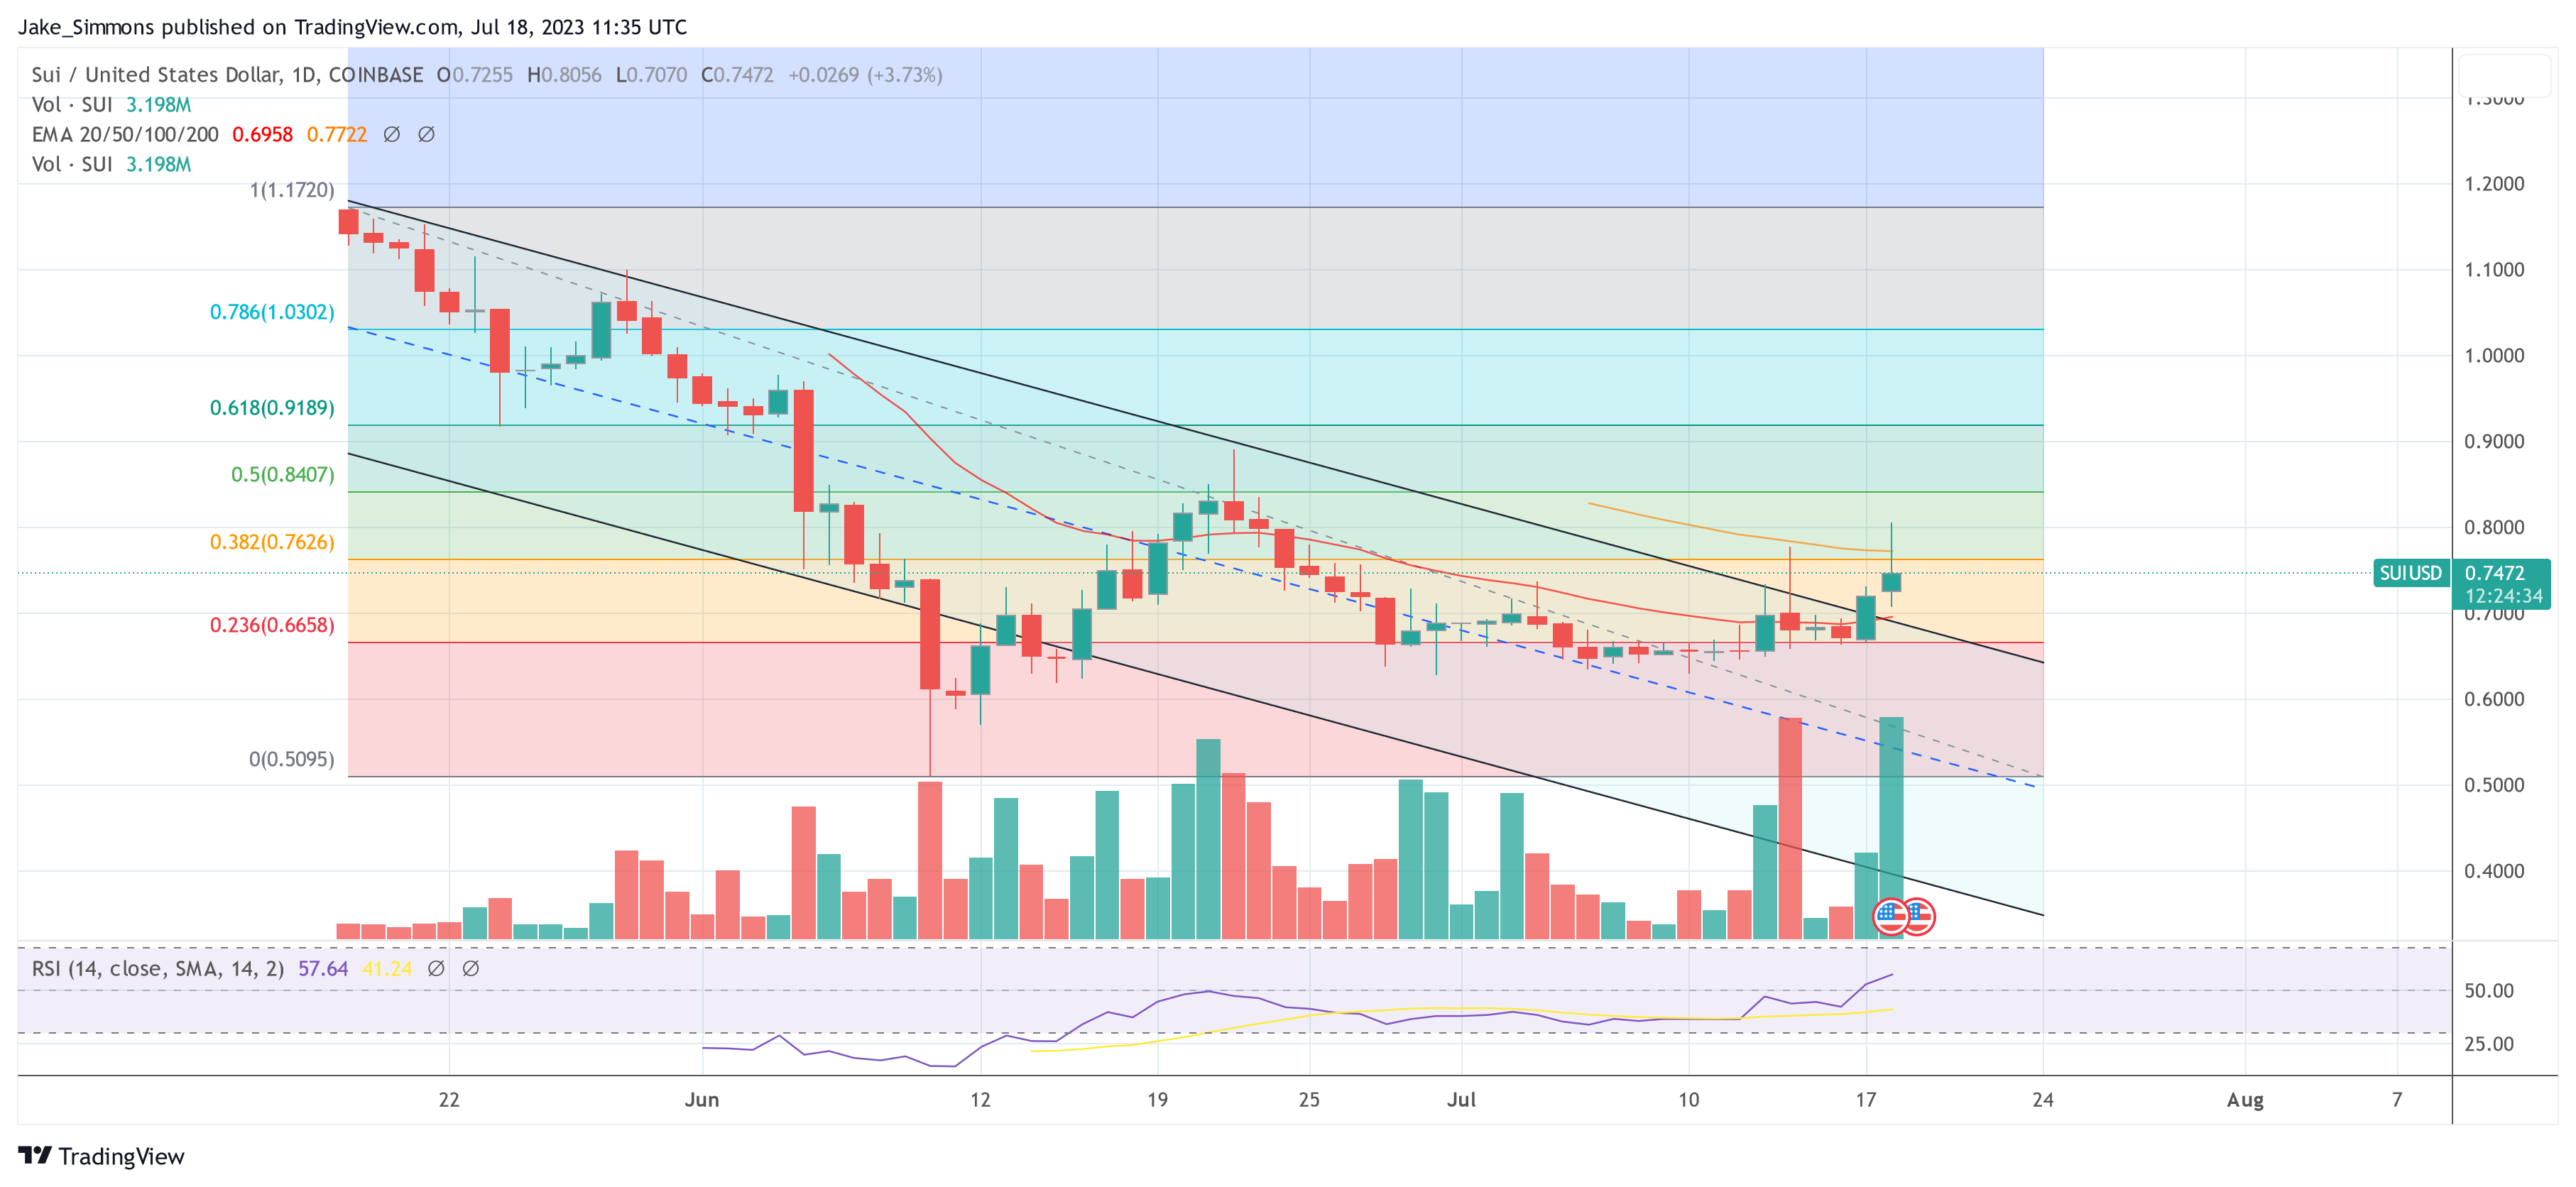 Price breaks out of downtrend, 1-day chart | Source: SUIUSD on TradingView.com